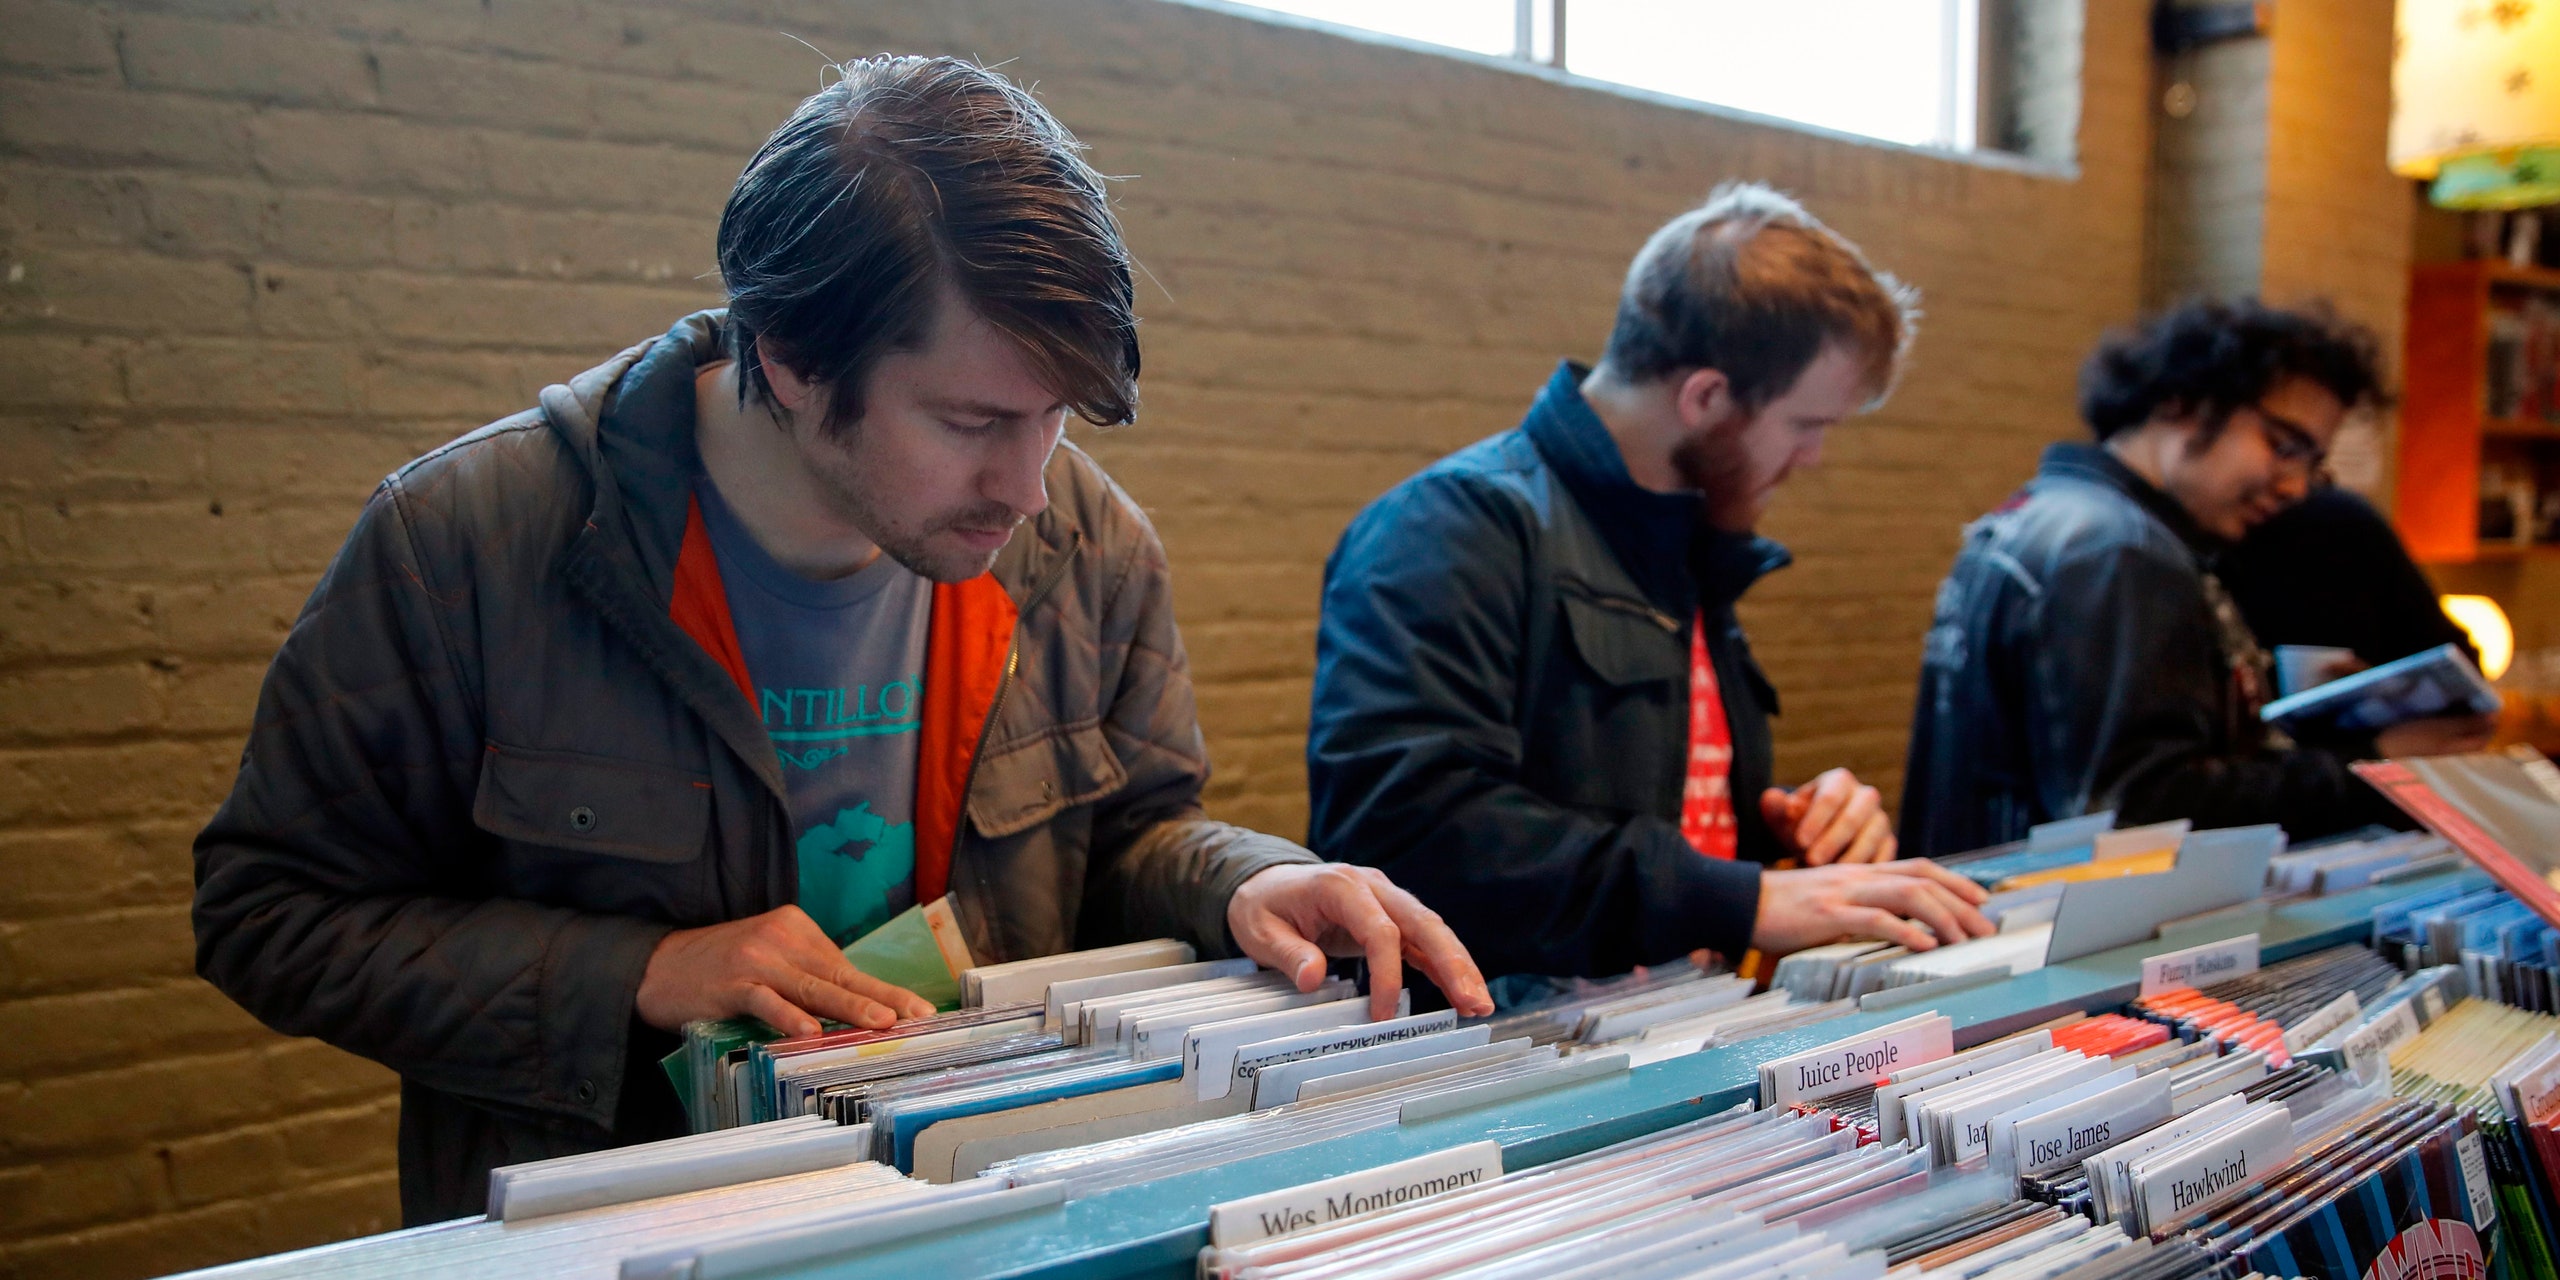 Record Store Day 2019 in Chicago.